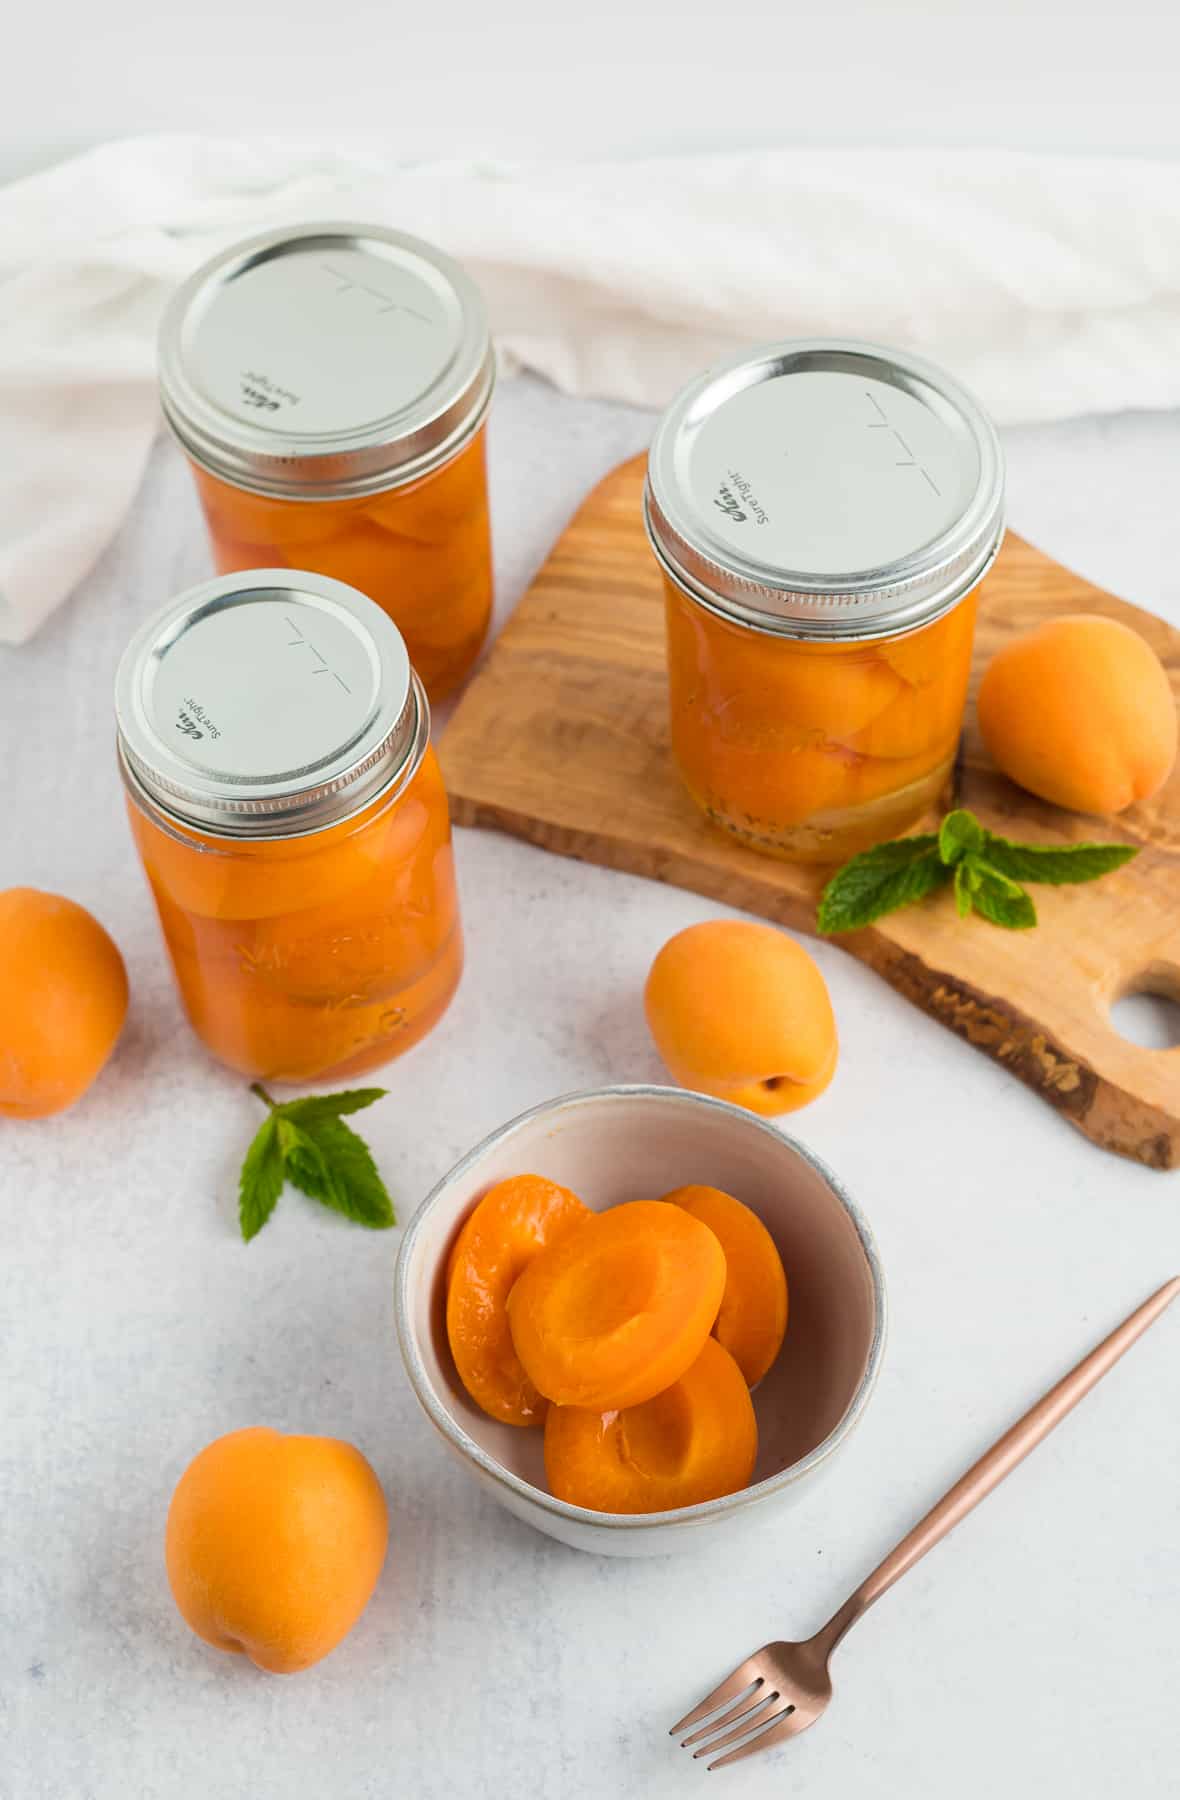 How to make preserved apricots?